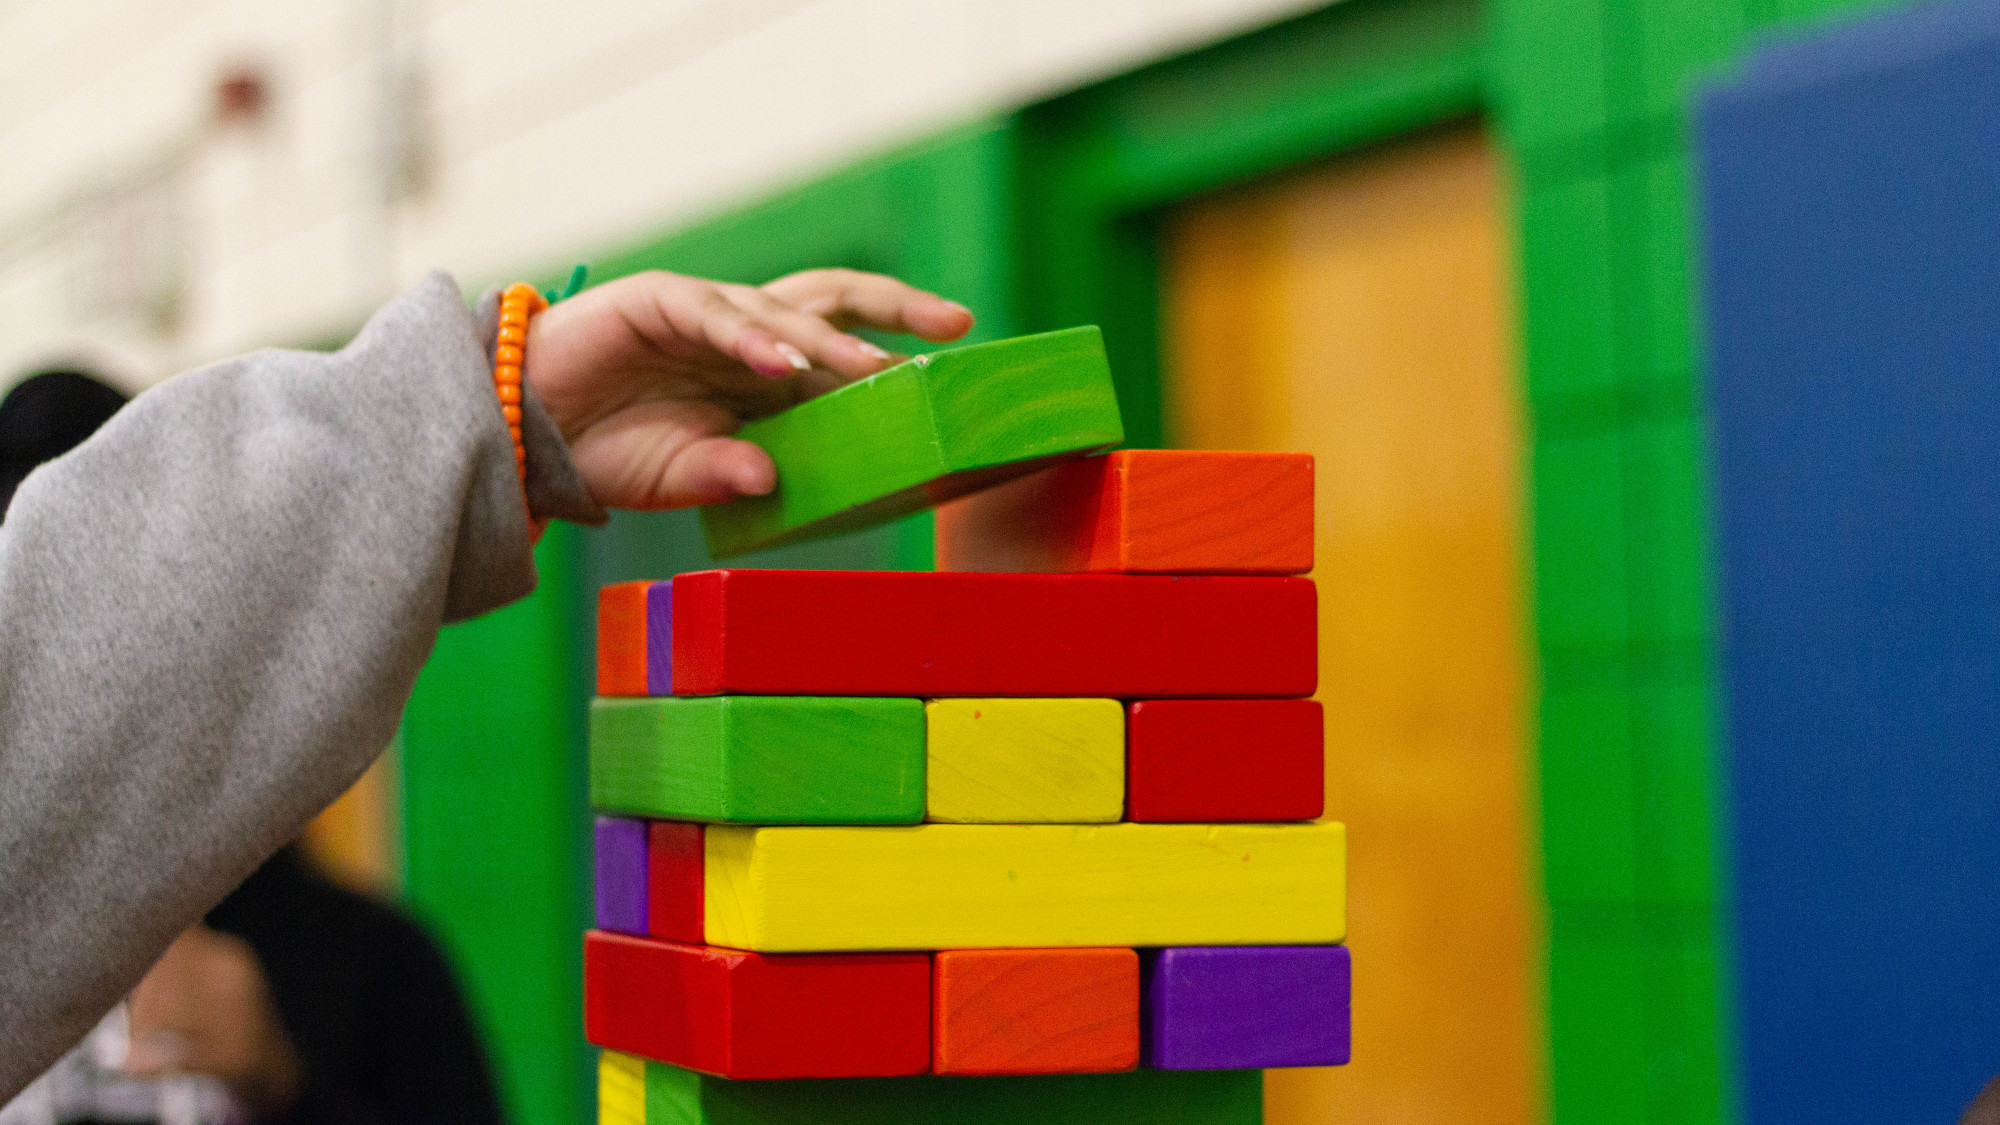 A kids hand puts a green wooden block on a tower built from other wooden block of different colors